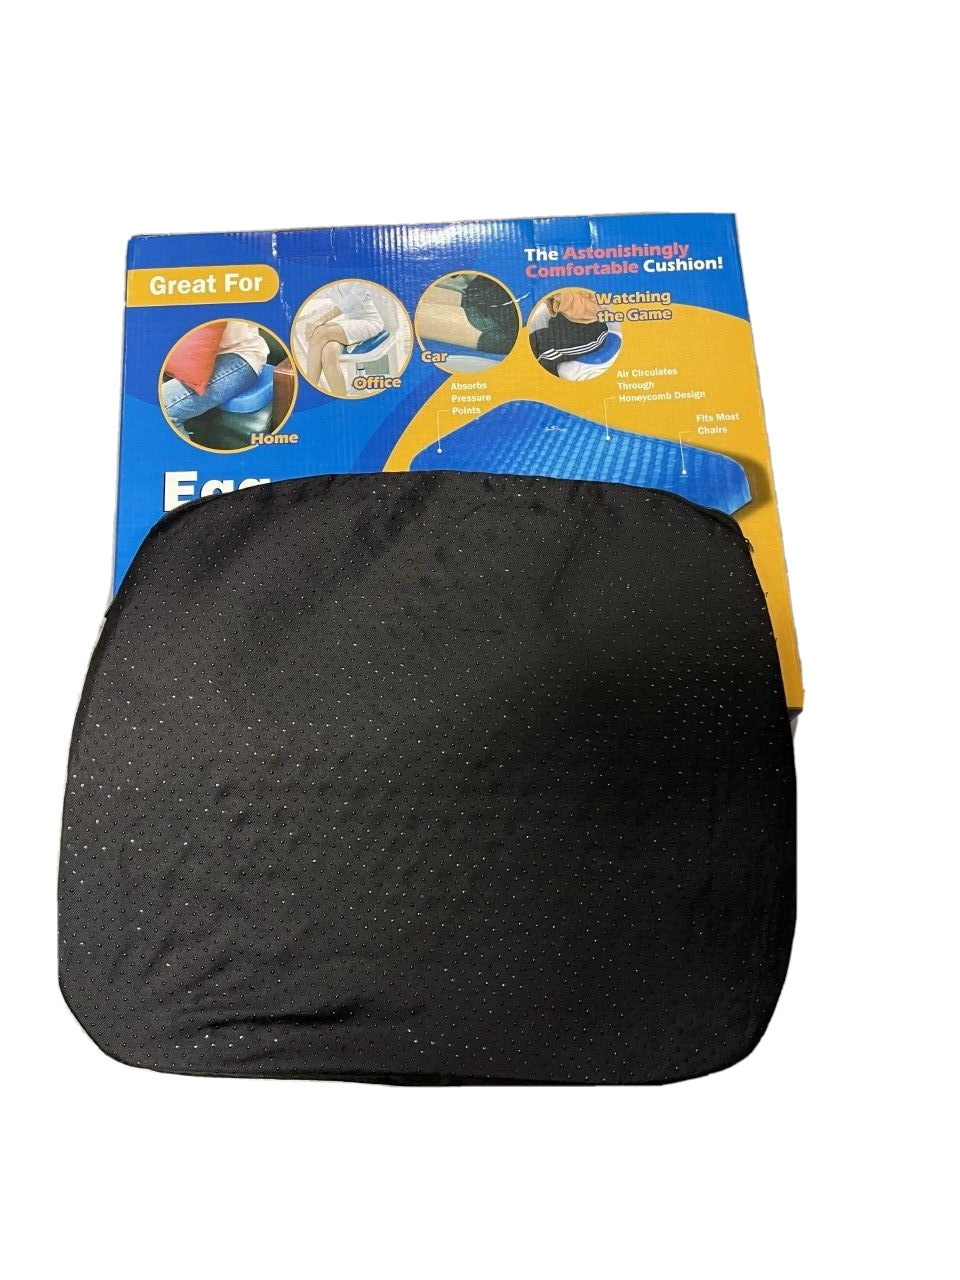 Egg Sitter Flex Cushion - As Seen on TV Products USA